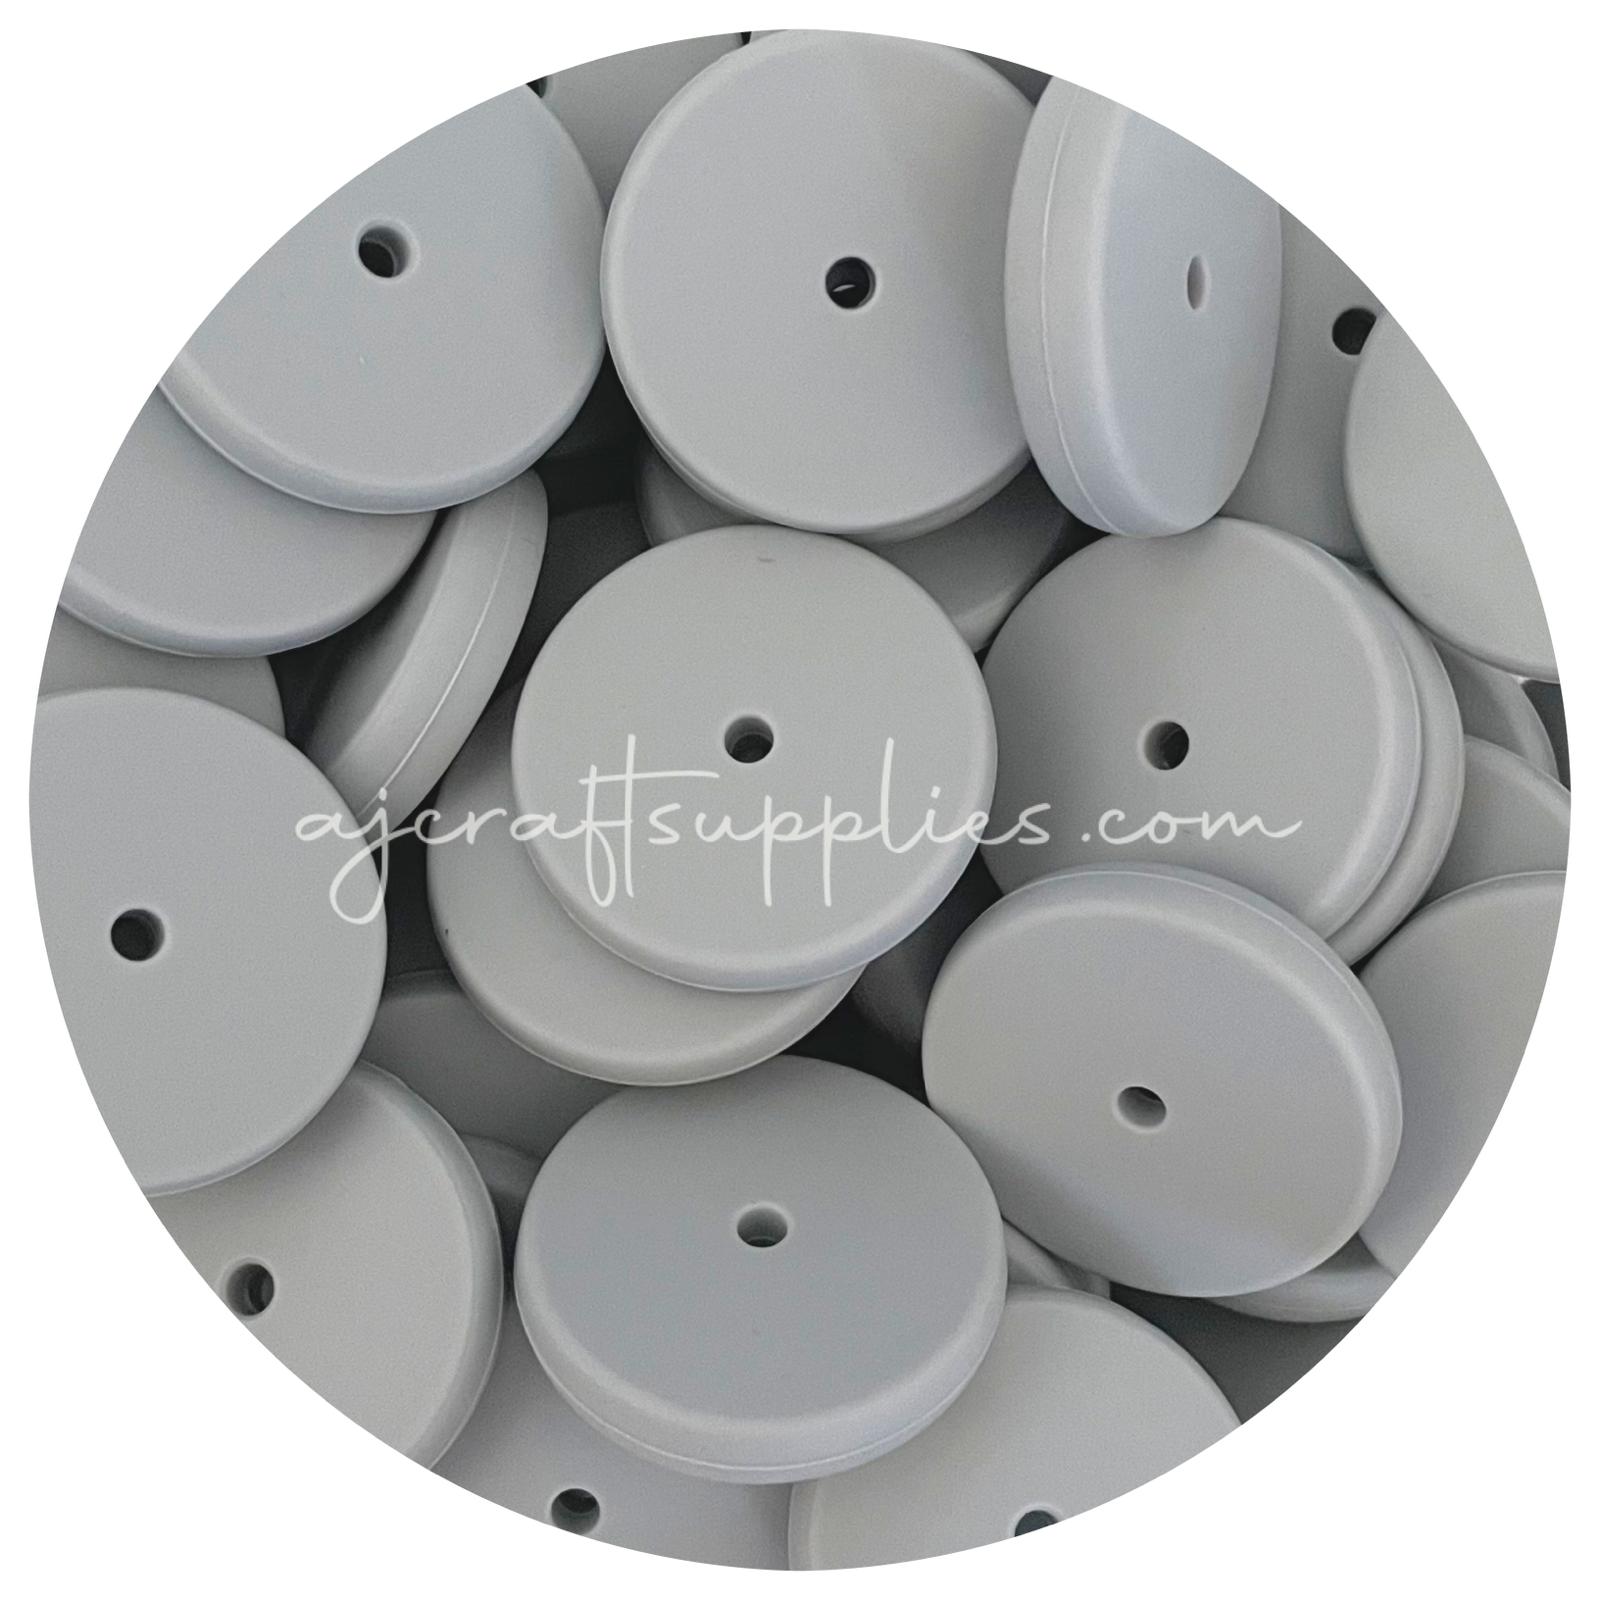 Light Grey - 25mm Flat Coin Silicone Beads - 5 beads